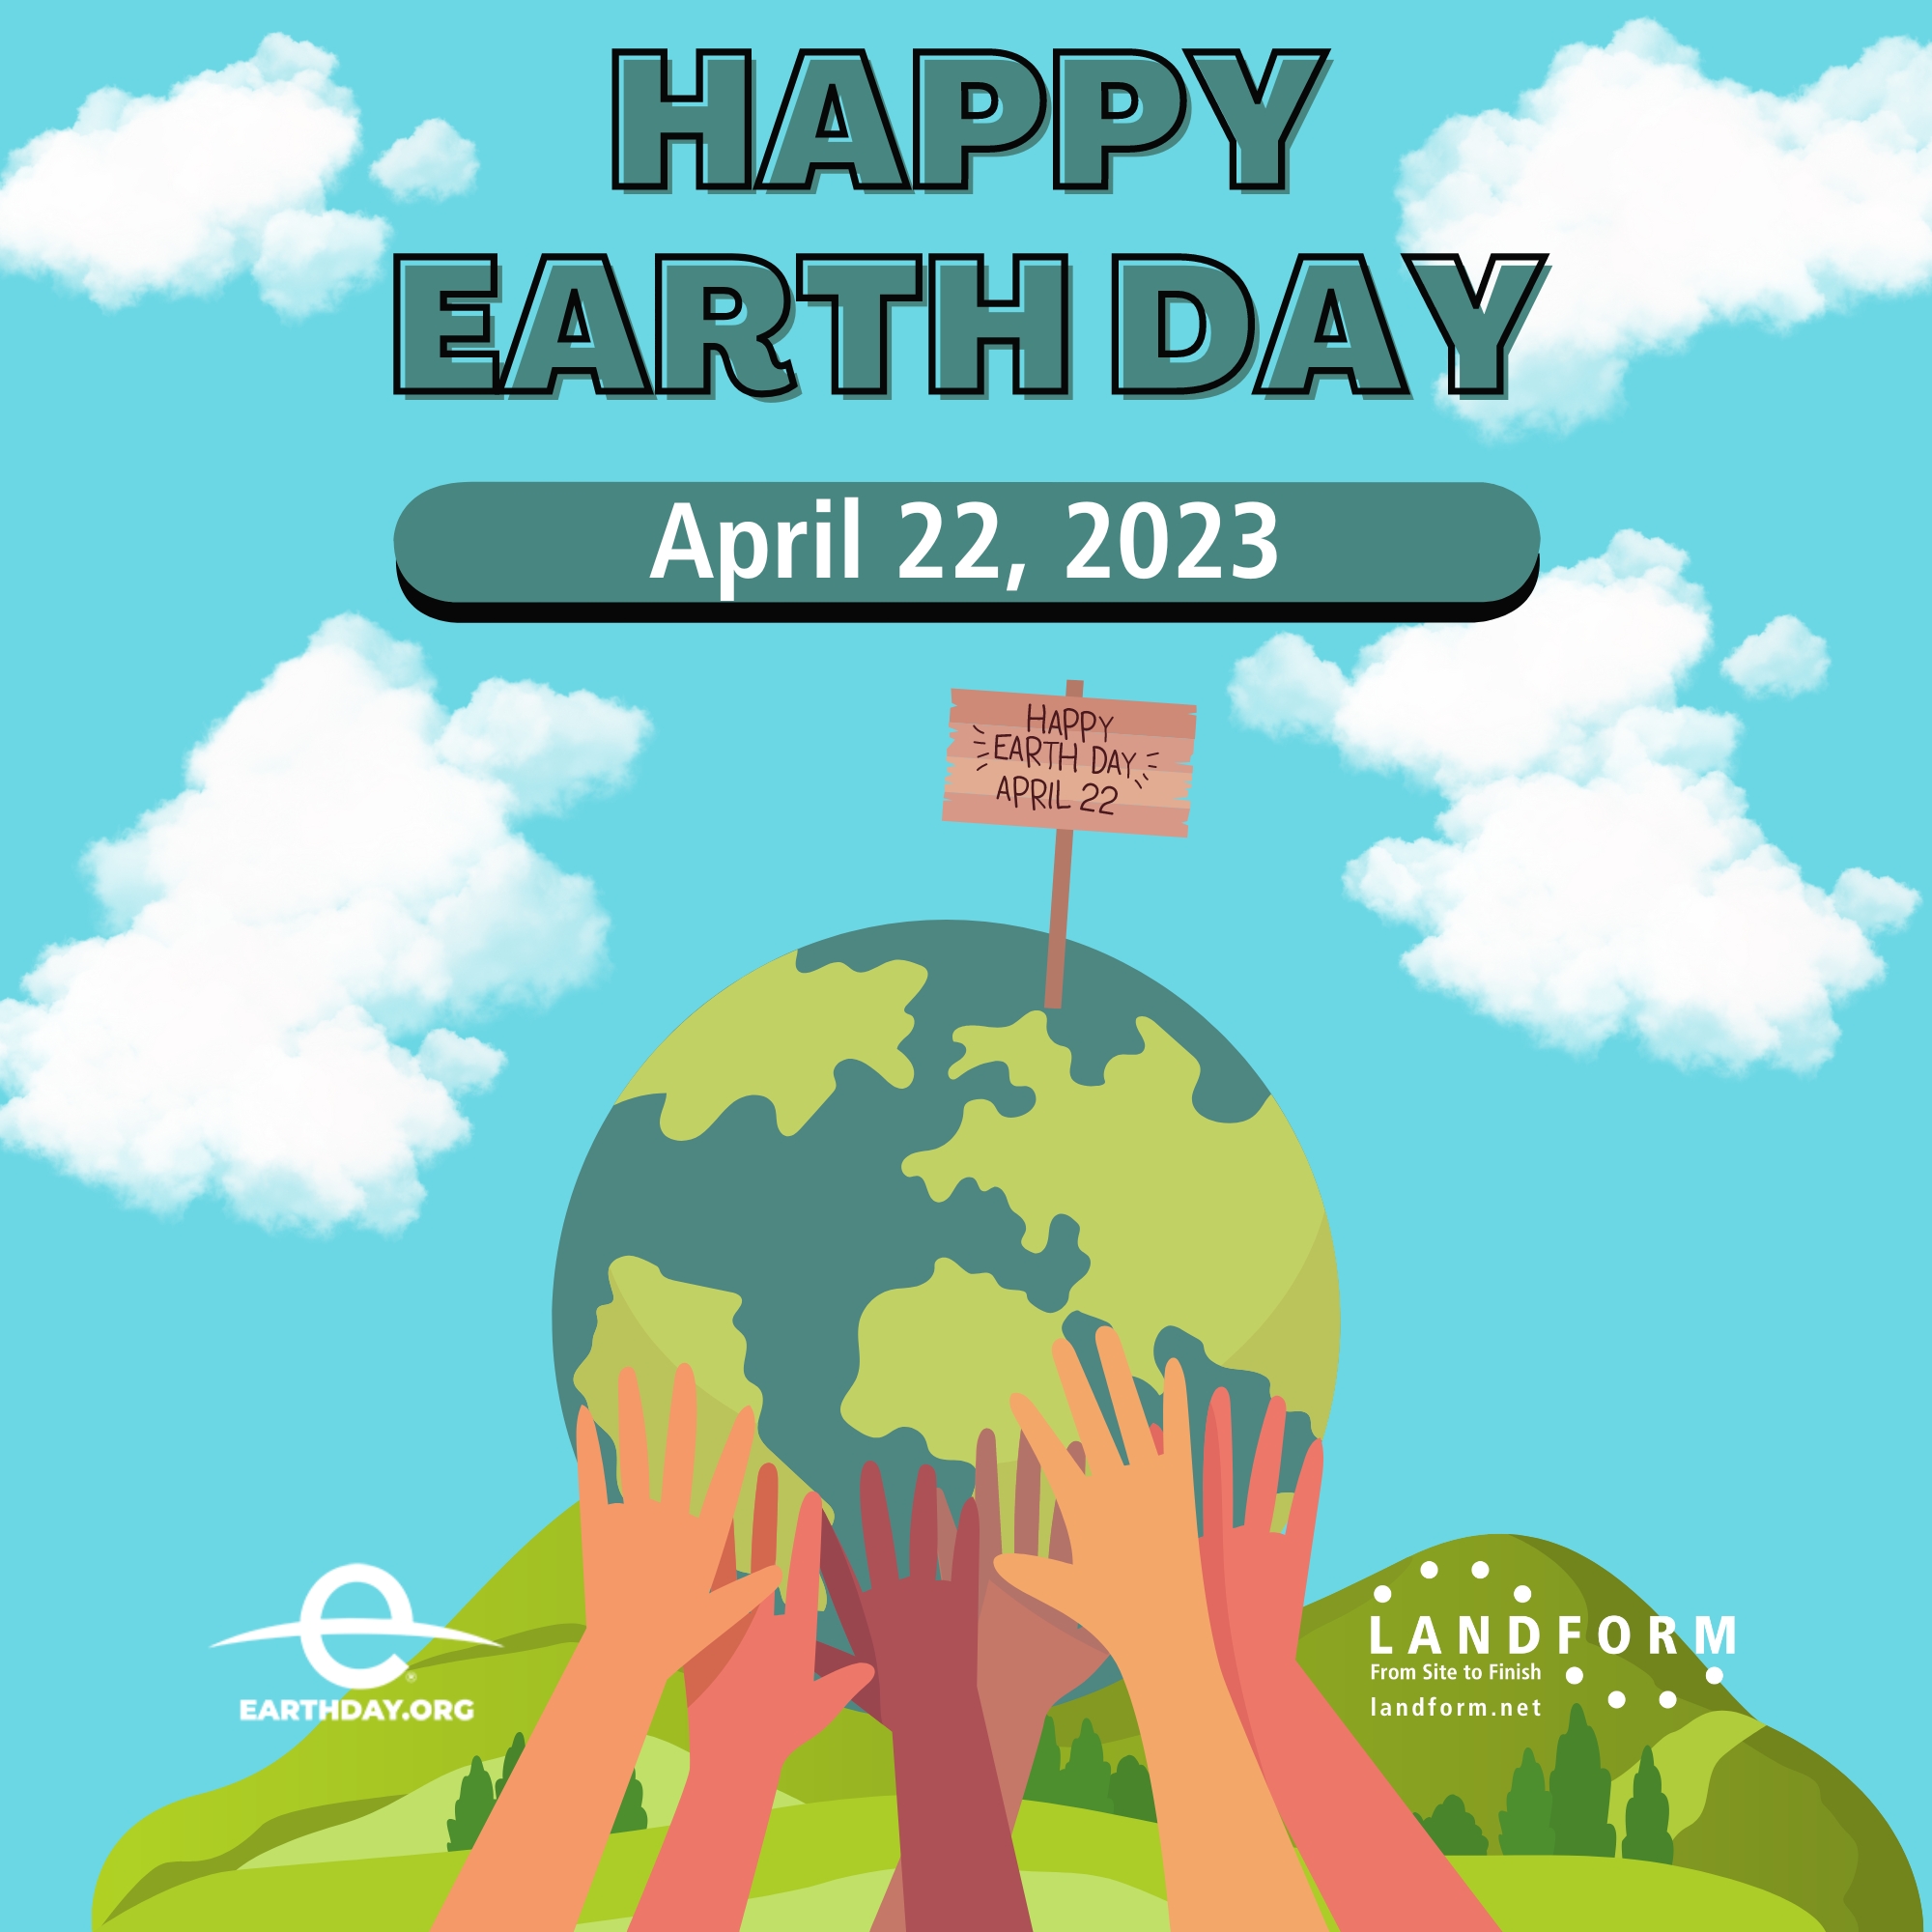 earth day sustainability sustainable reduce reuse recycle plant based diet eco friendly green transportation conservation